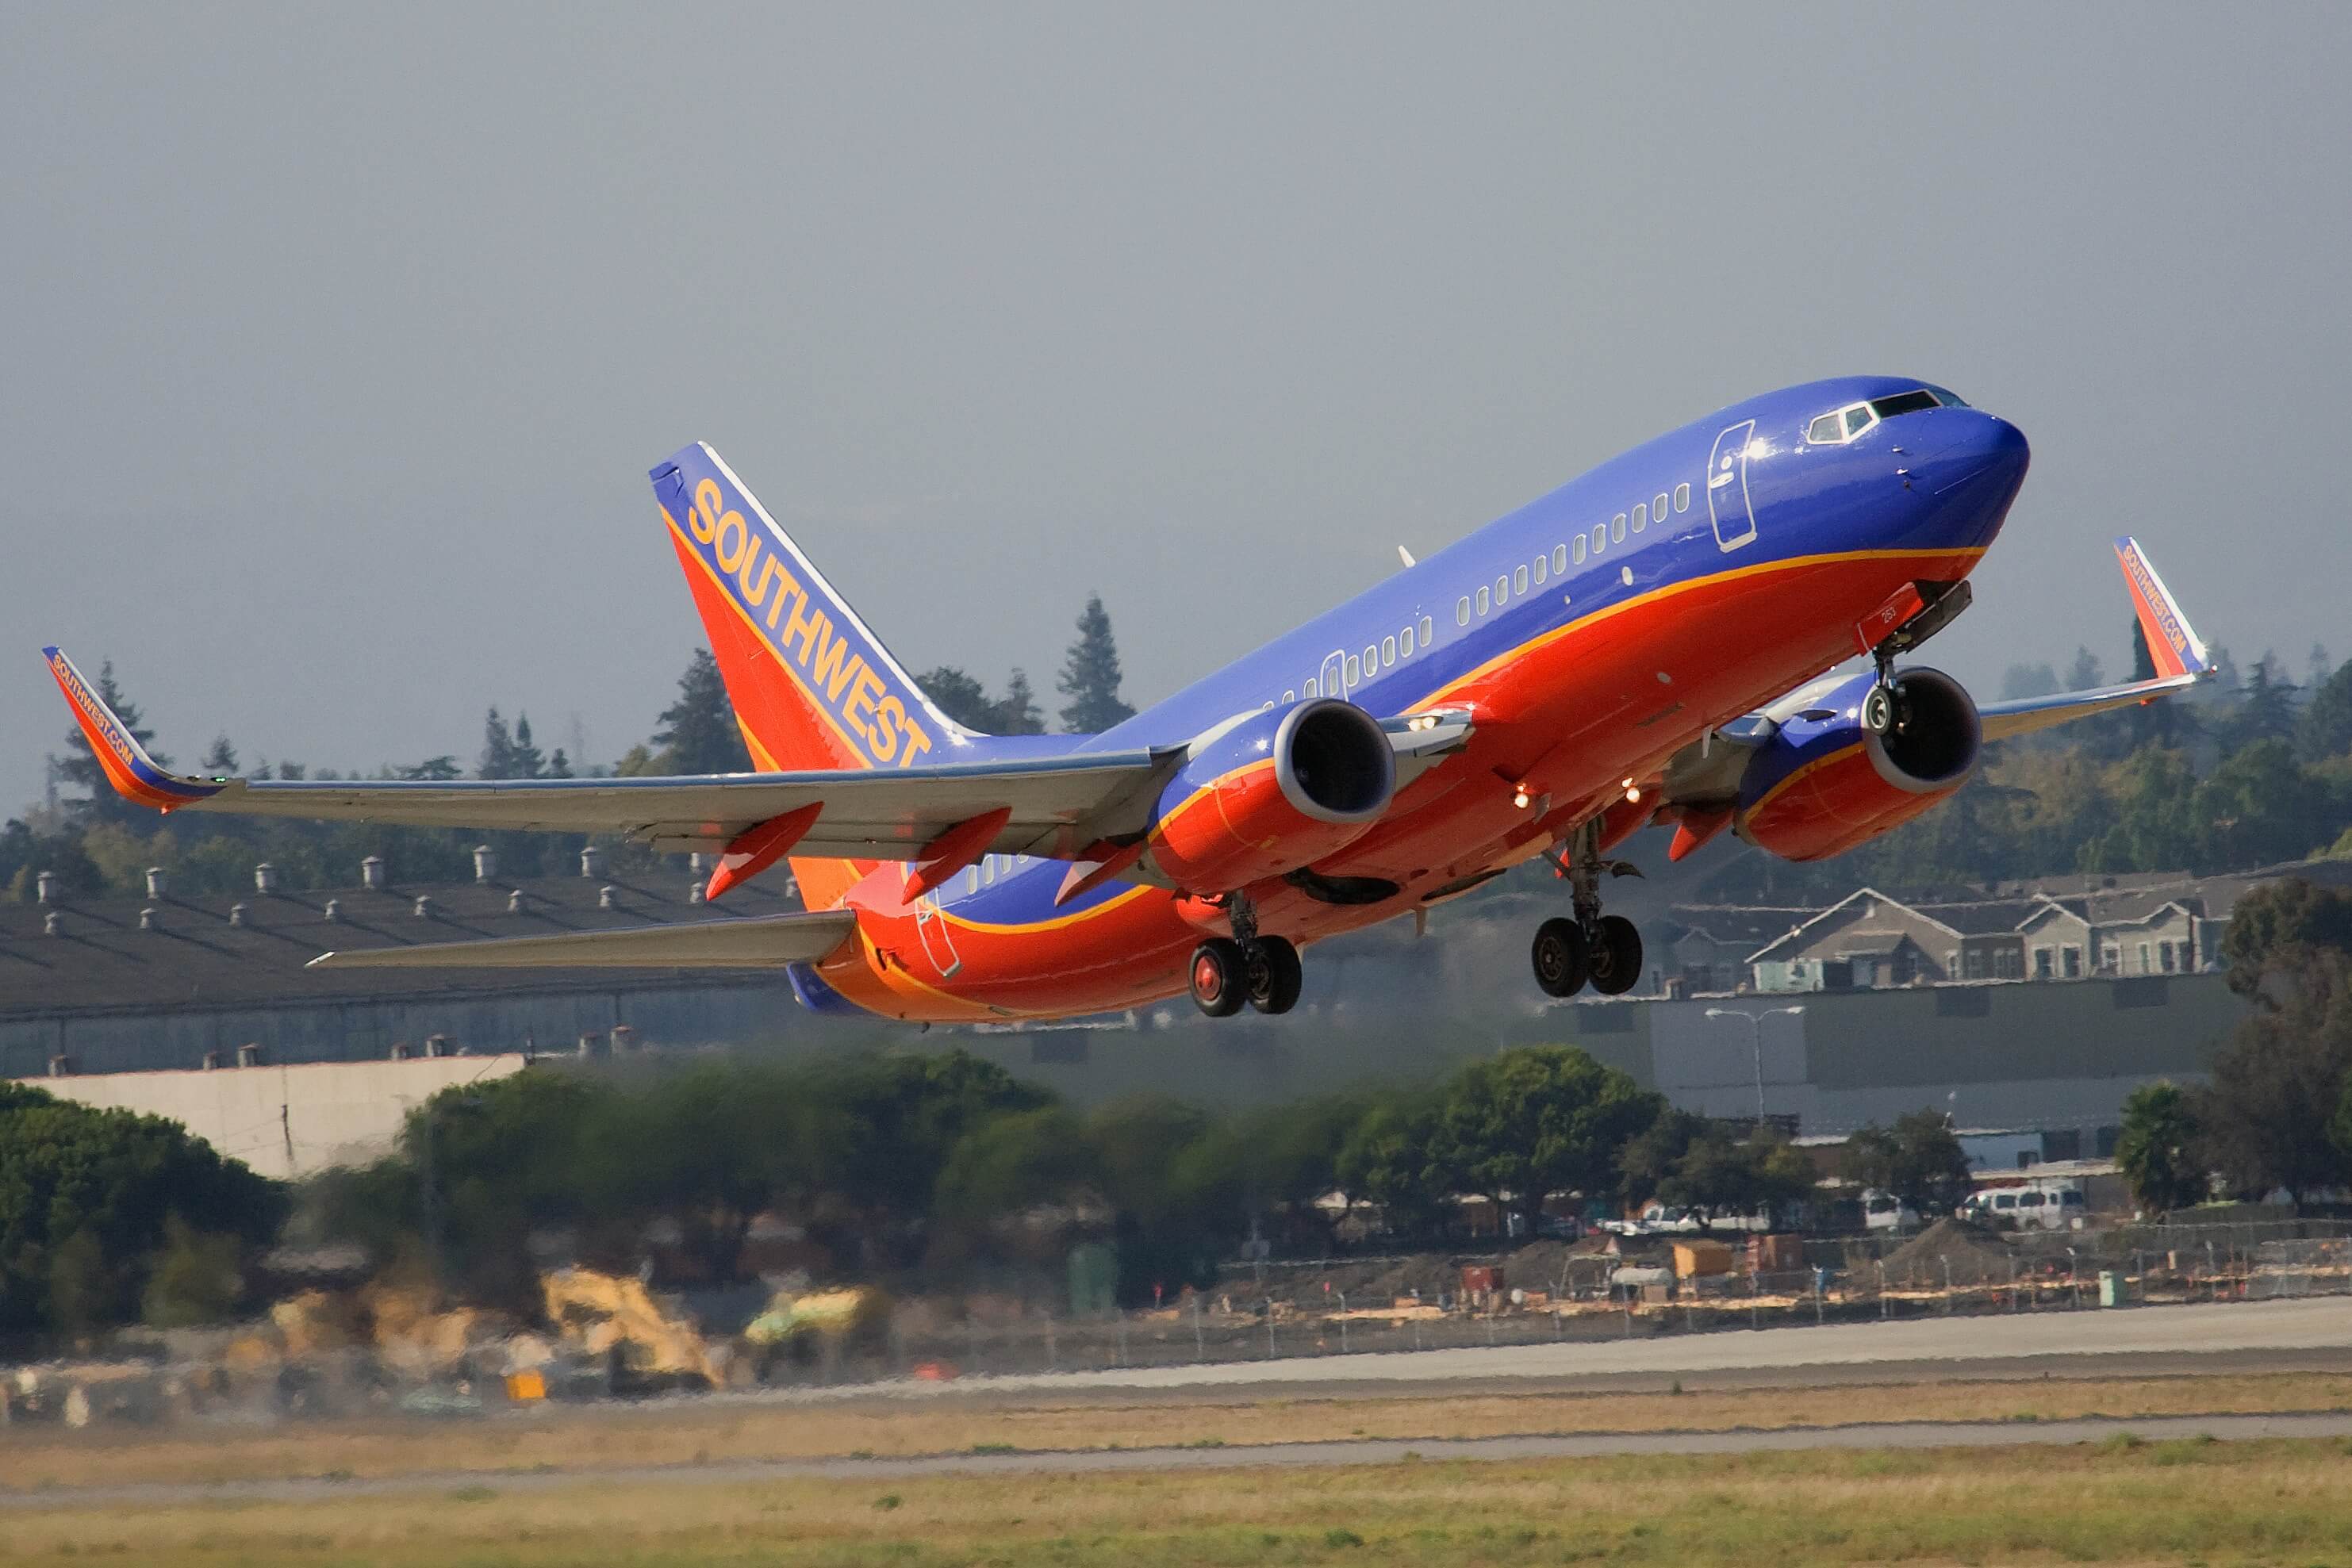 Southwest Airlines adds new nonstop flights to Kona, Hawaii, and Lihue, Kauai from San Jose